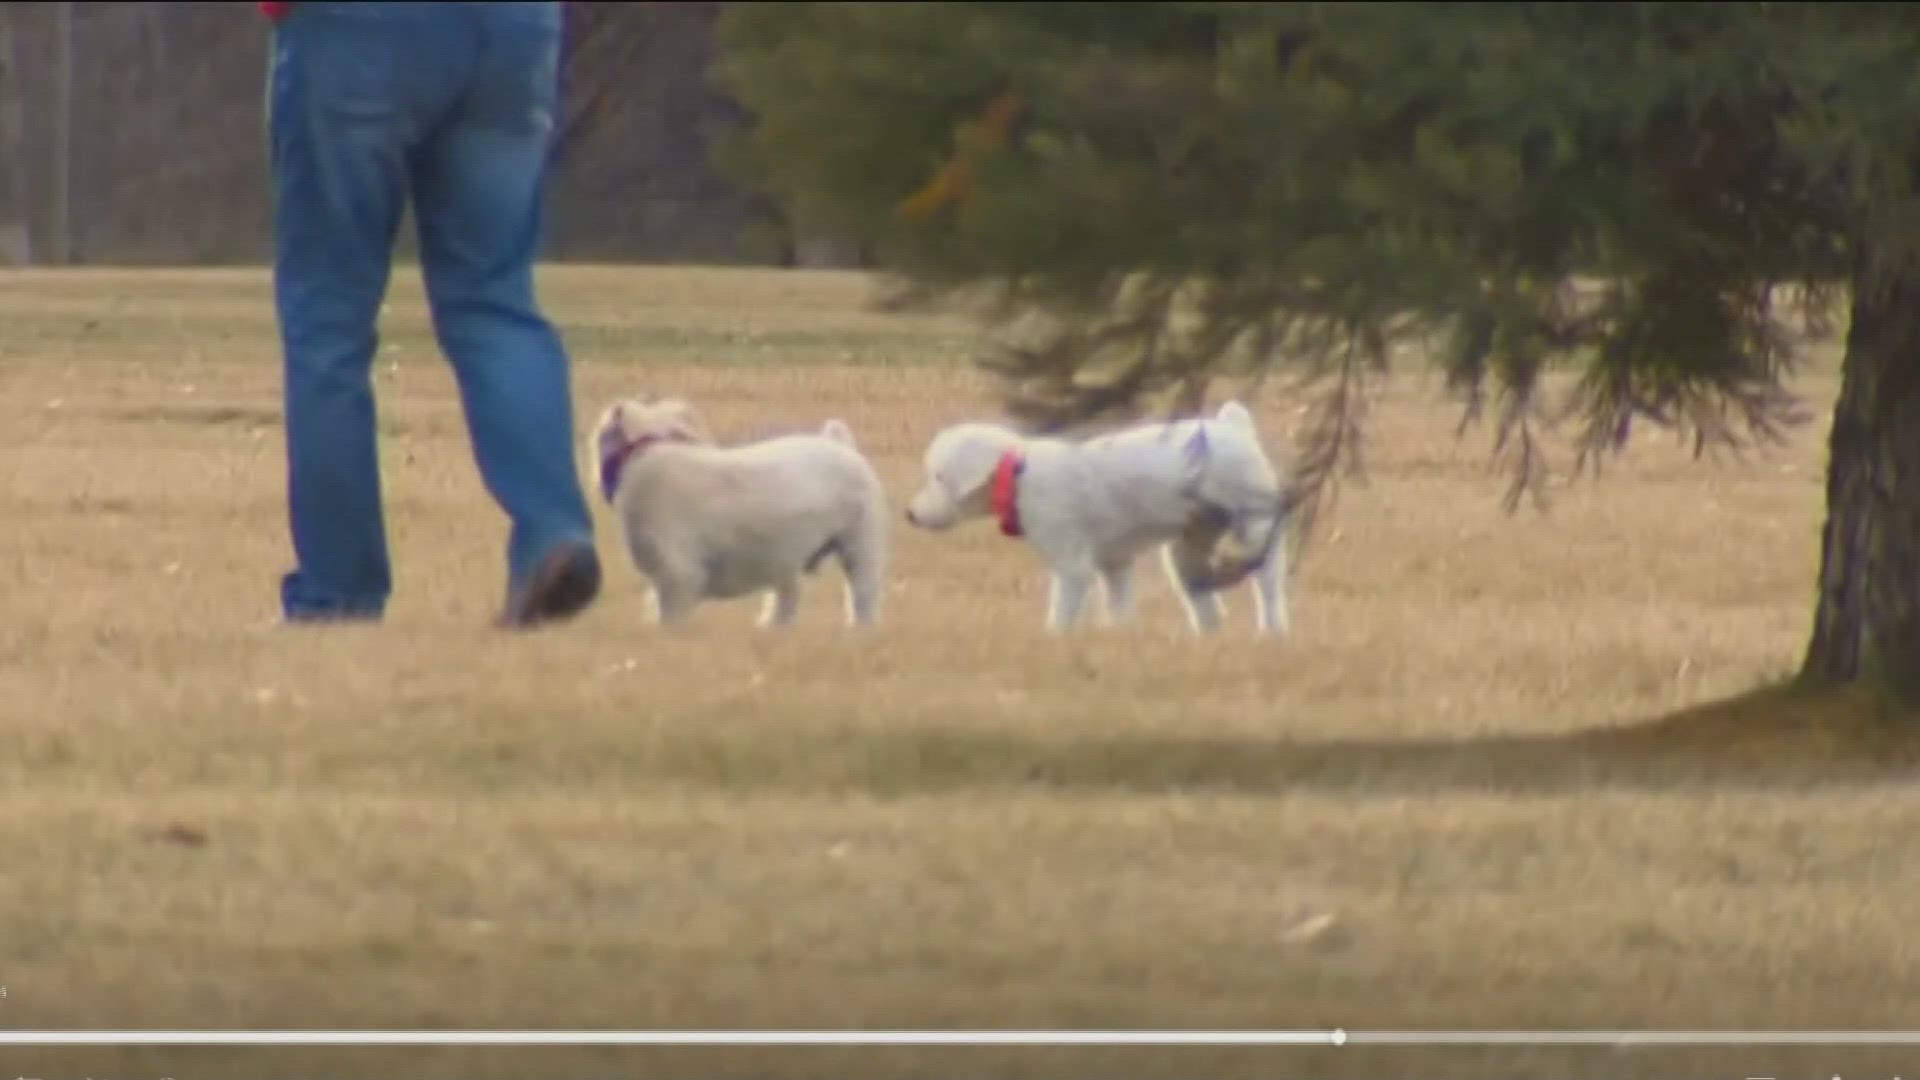 On Wednesday, dog owners can start letting their dogs roam free in three Boise parks.